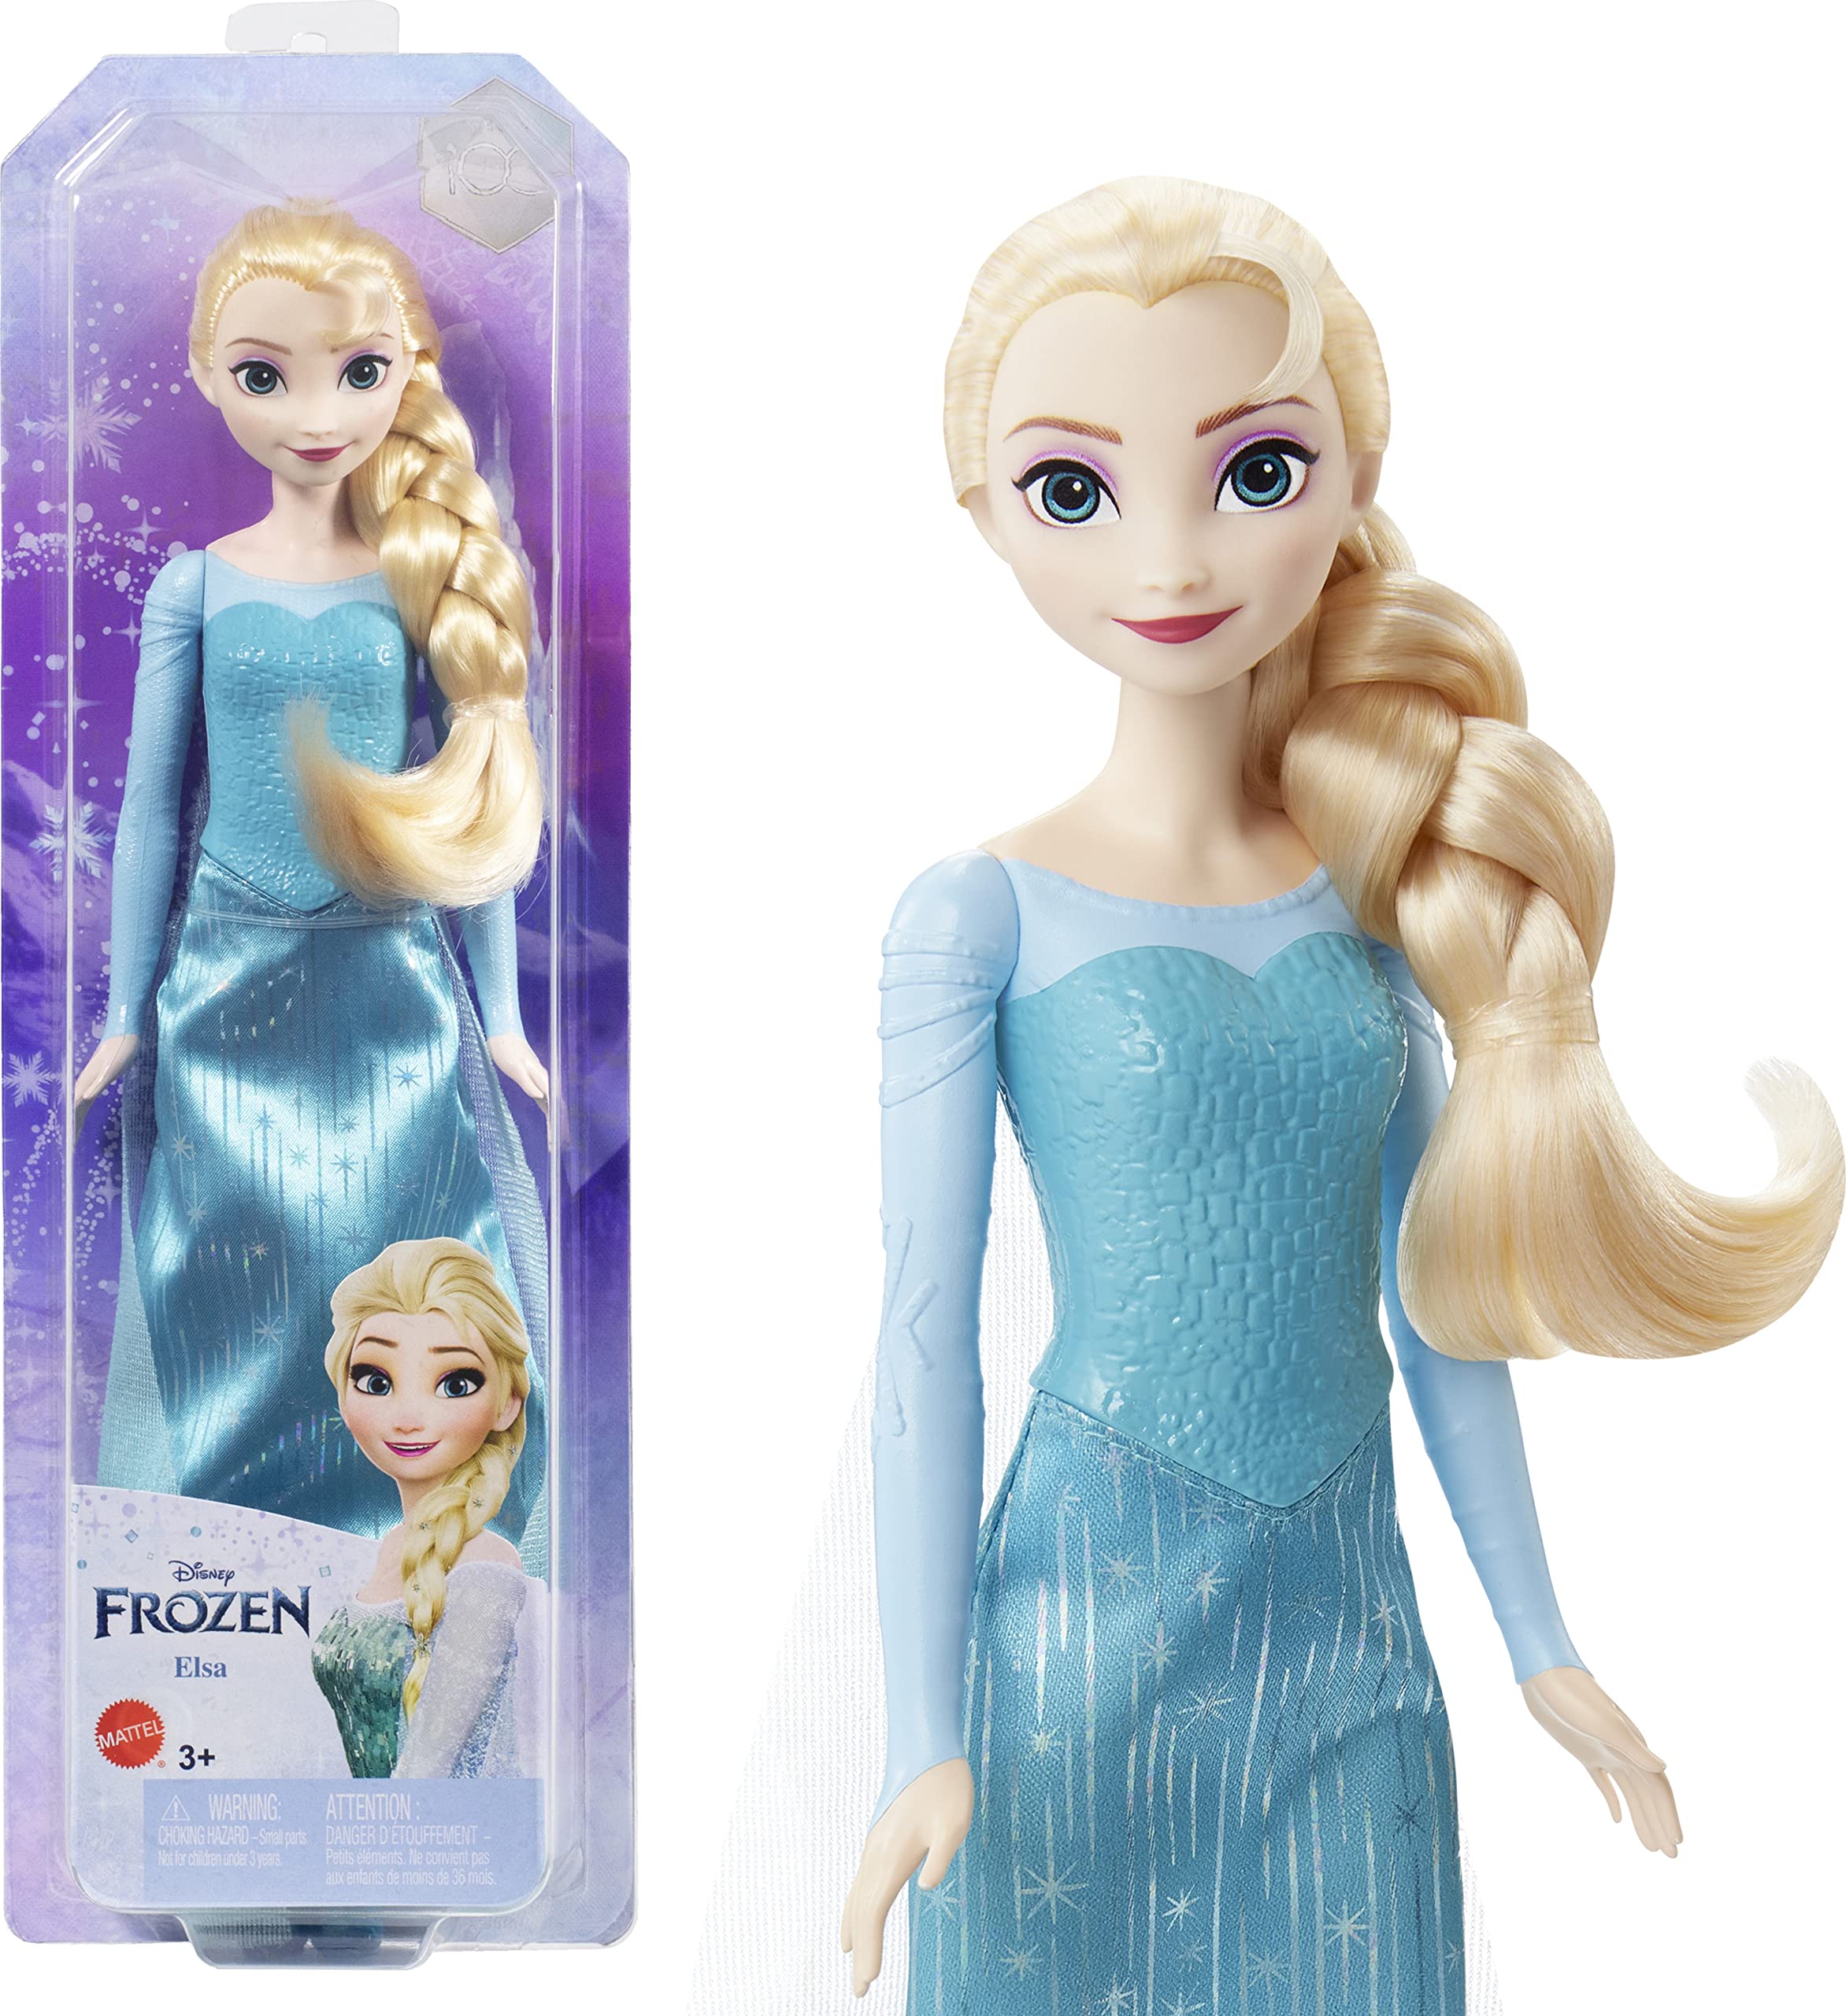 Disney Frozen Elsa Fashion Doll & Accessory, Signature Look, Toy Inspired by the Movie Disney Frozen